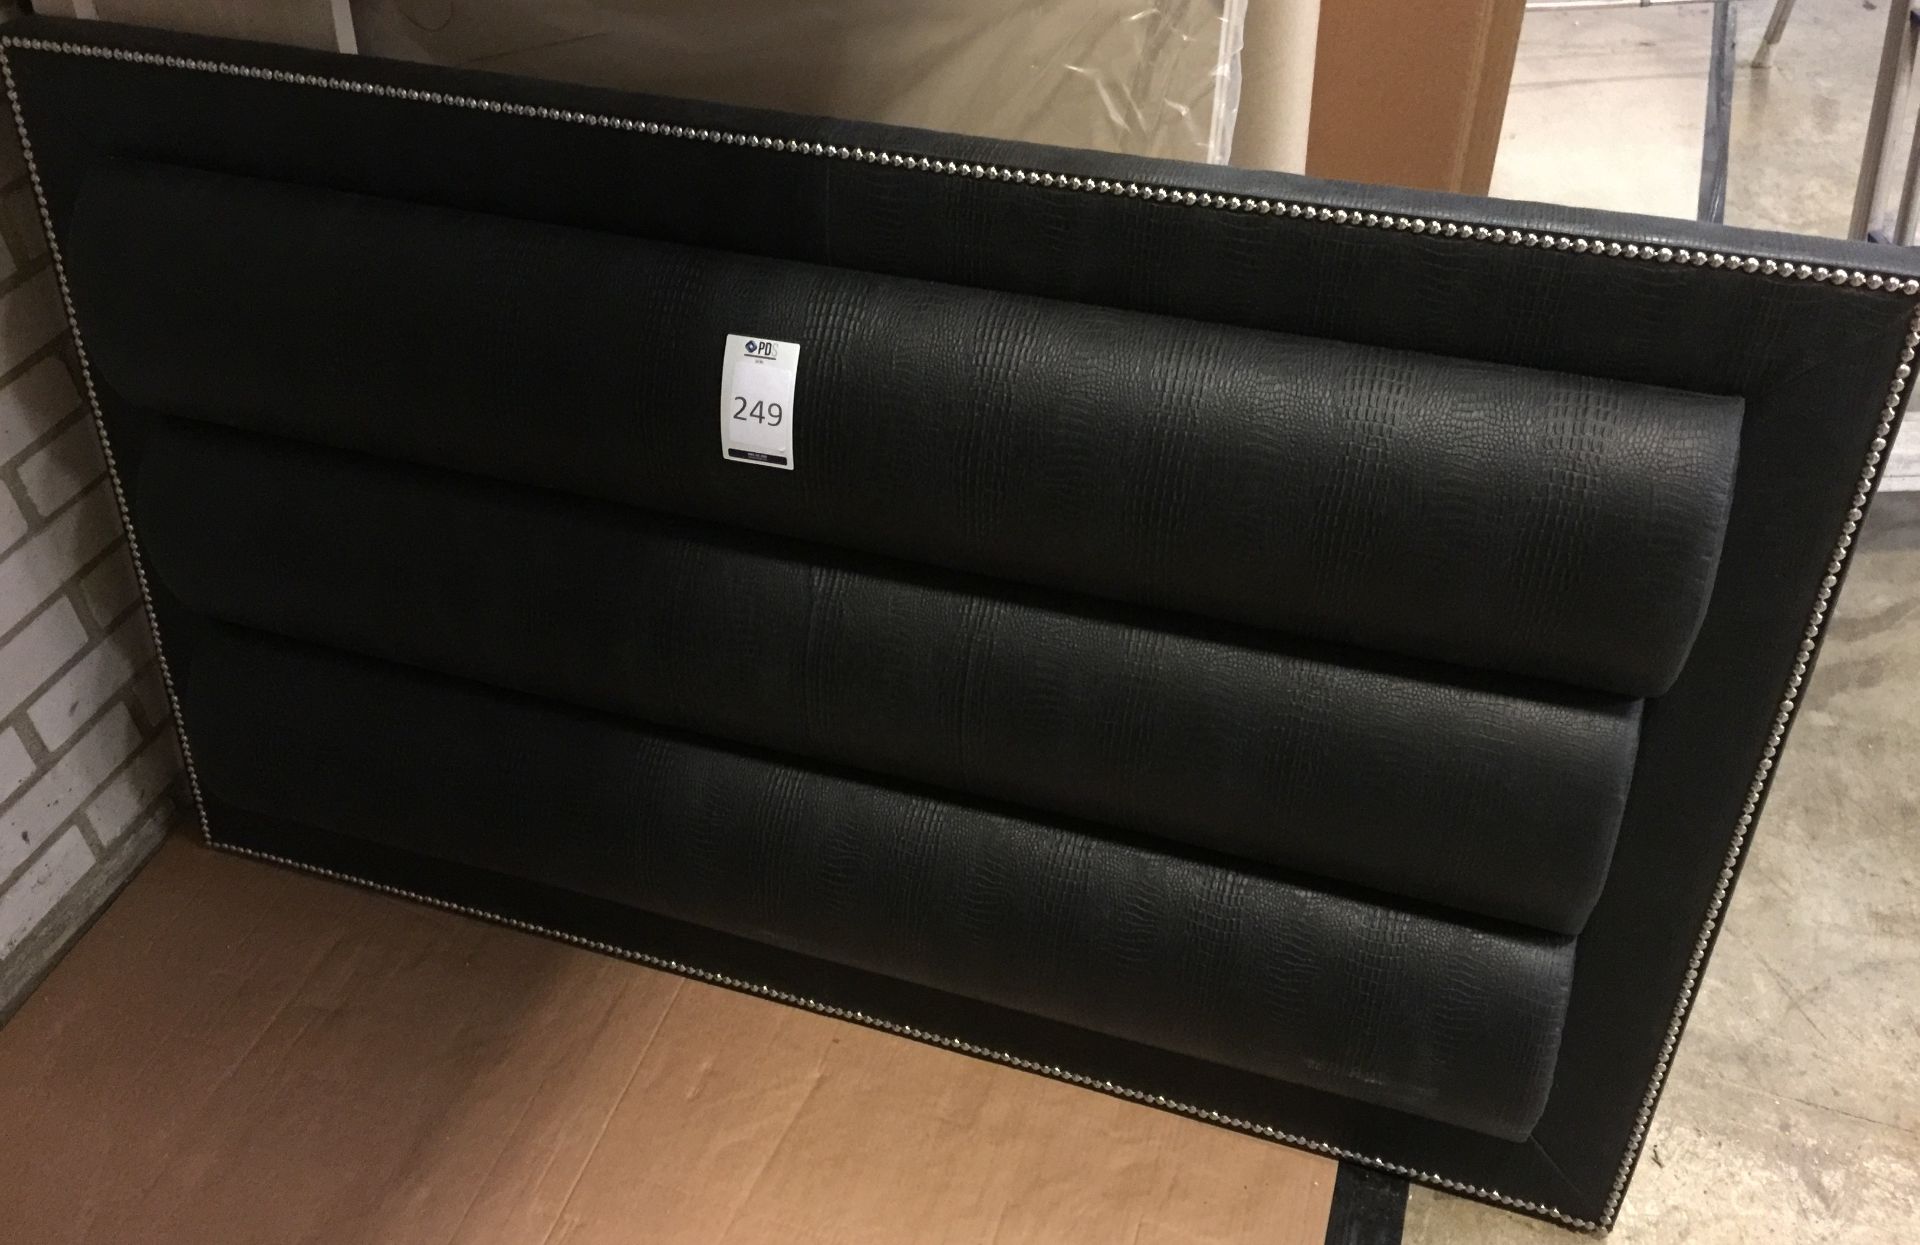 Black Leather Upholstered Headboard (5ft Wide, 3ft High) - Image 2 of 2